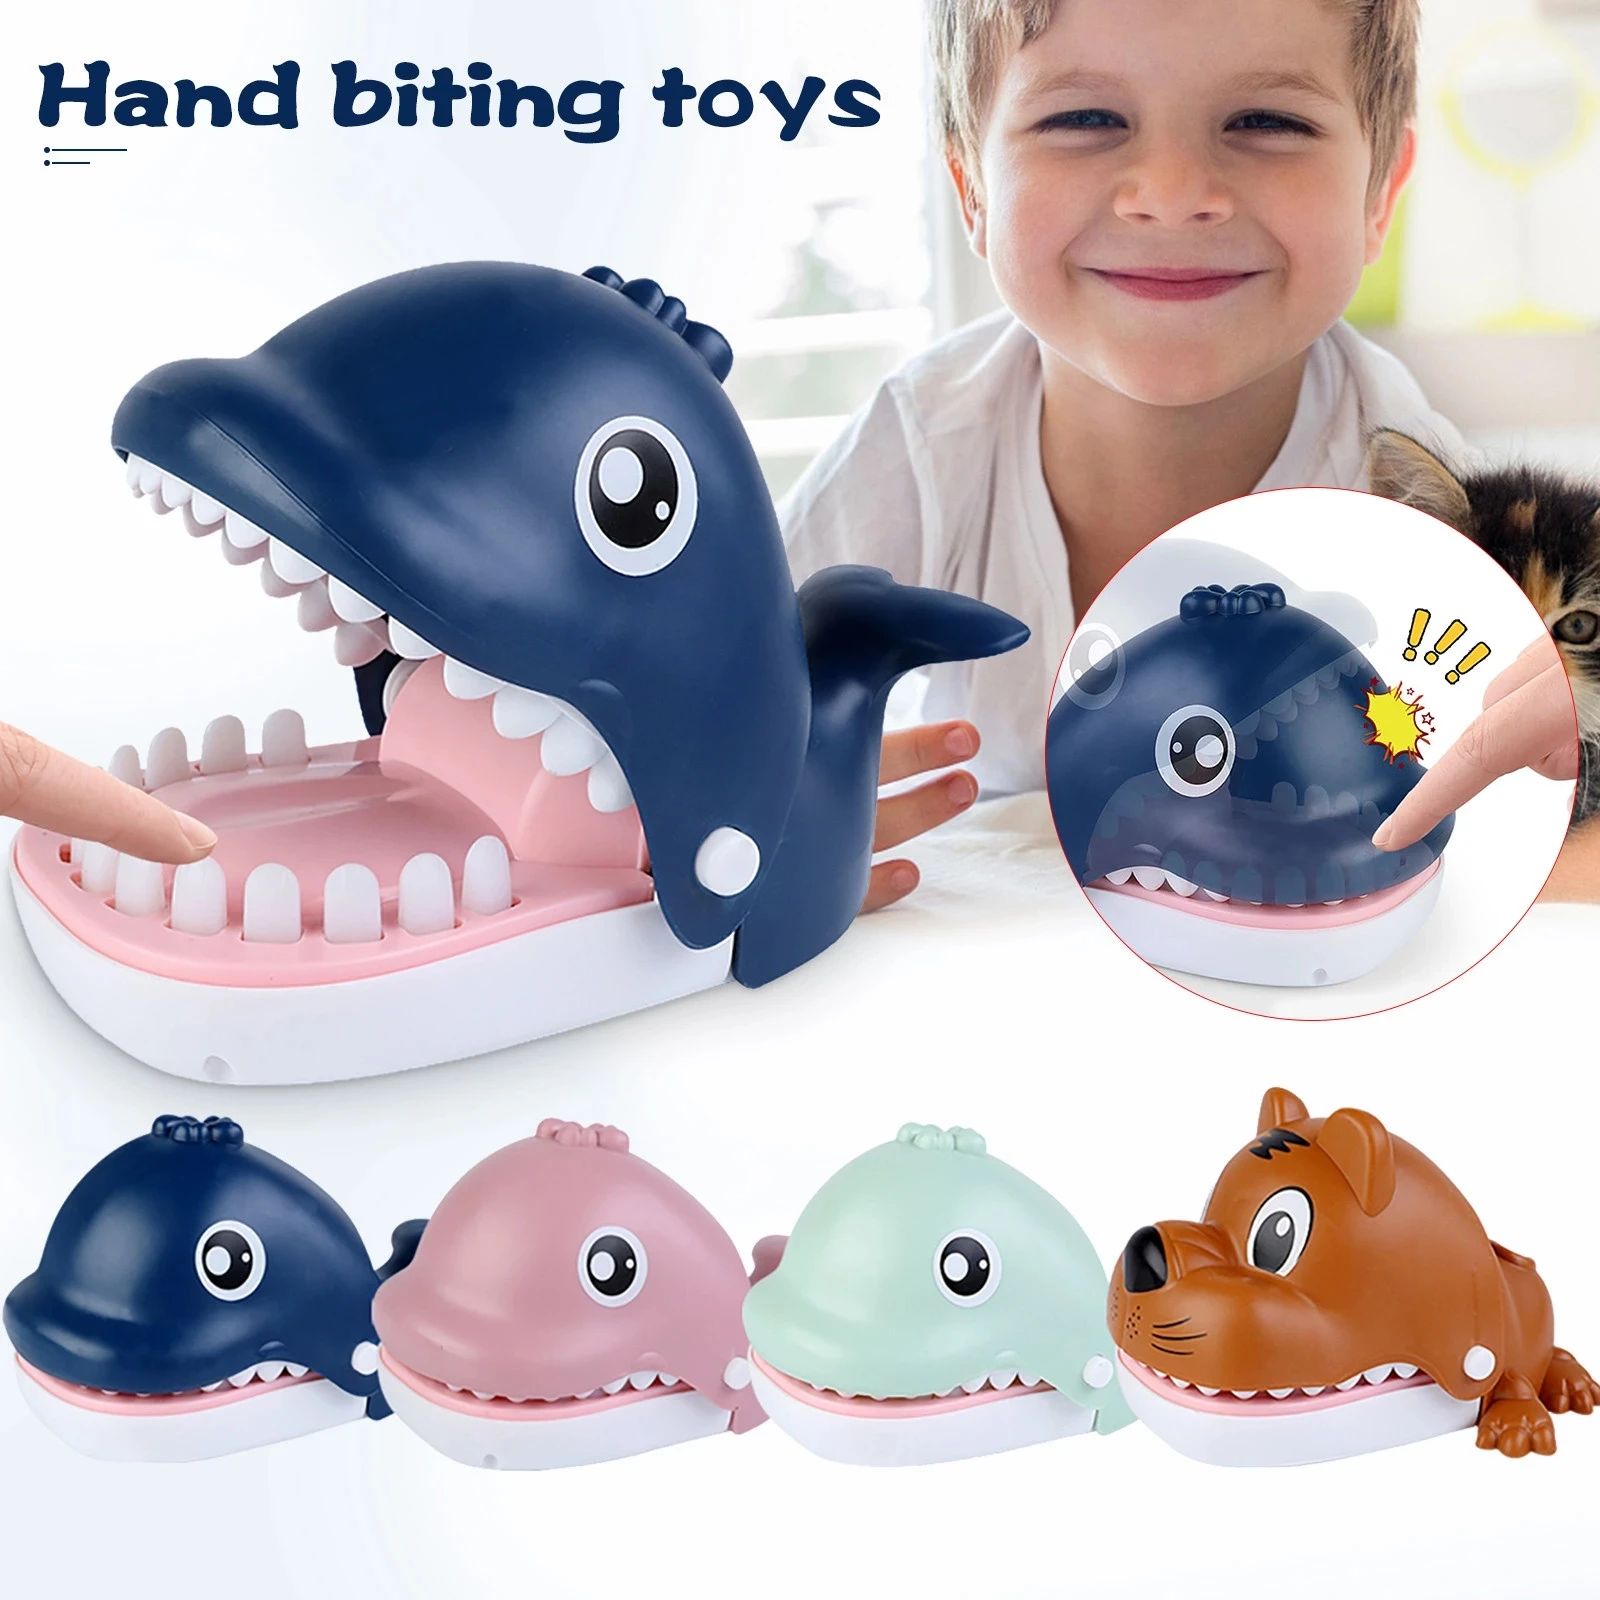 Kids Boy Child Crocodile Shark Mouth Dentist Bite Finger Game Playing Toy Funny 